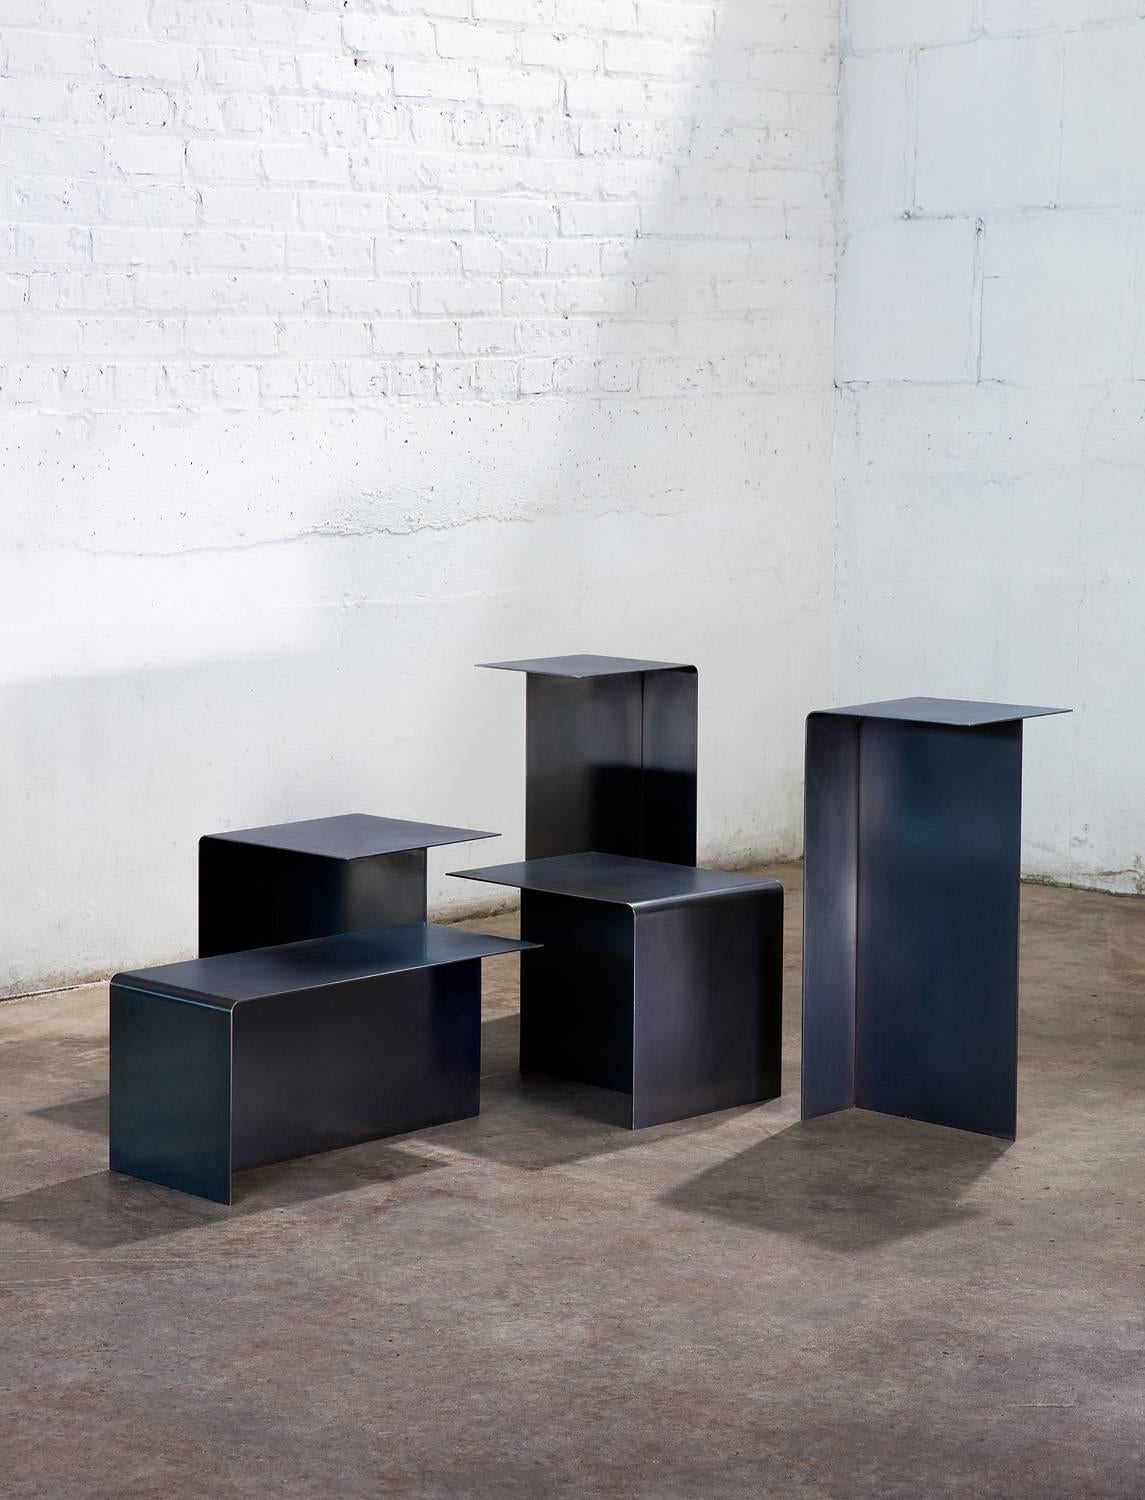 Modular T Tables for Cocktail and Coffee Table, Made of Darkened Stainless Steel im Zustand „Neu“ im Angebot in Chicago, IL